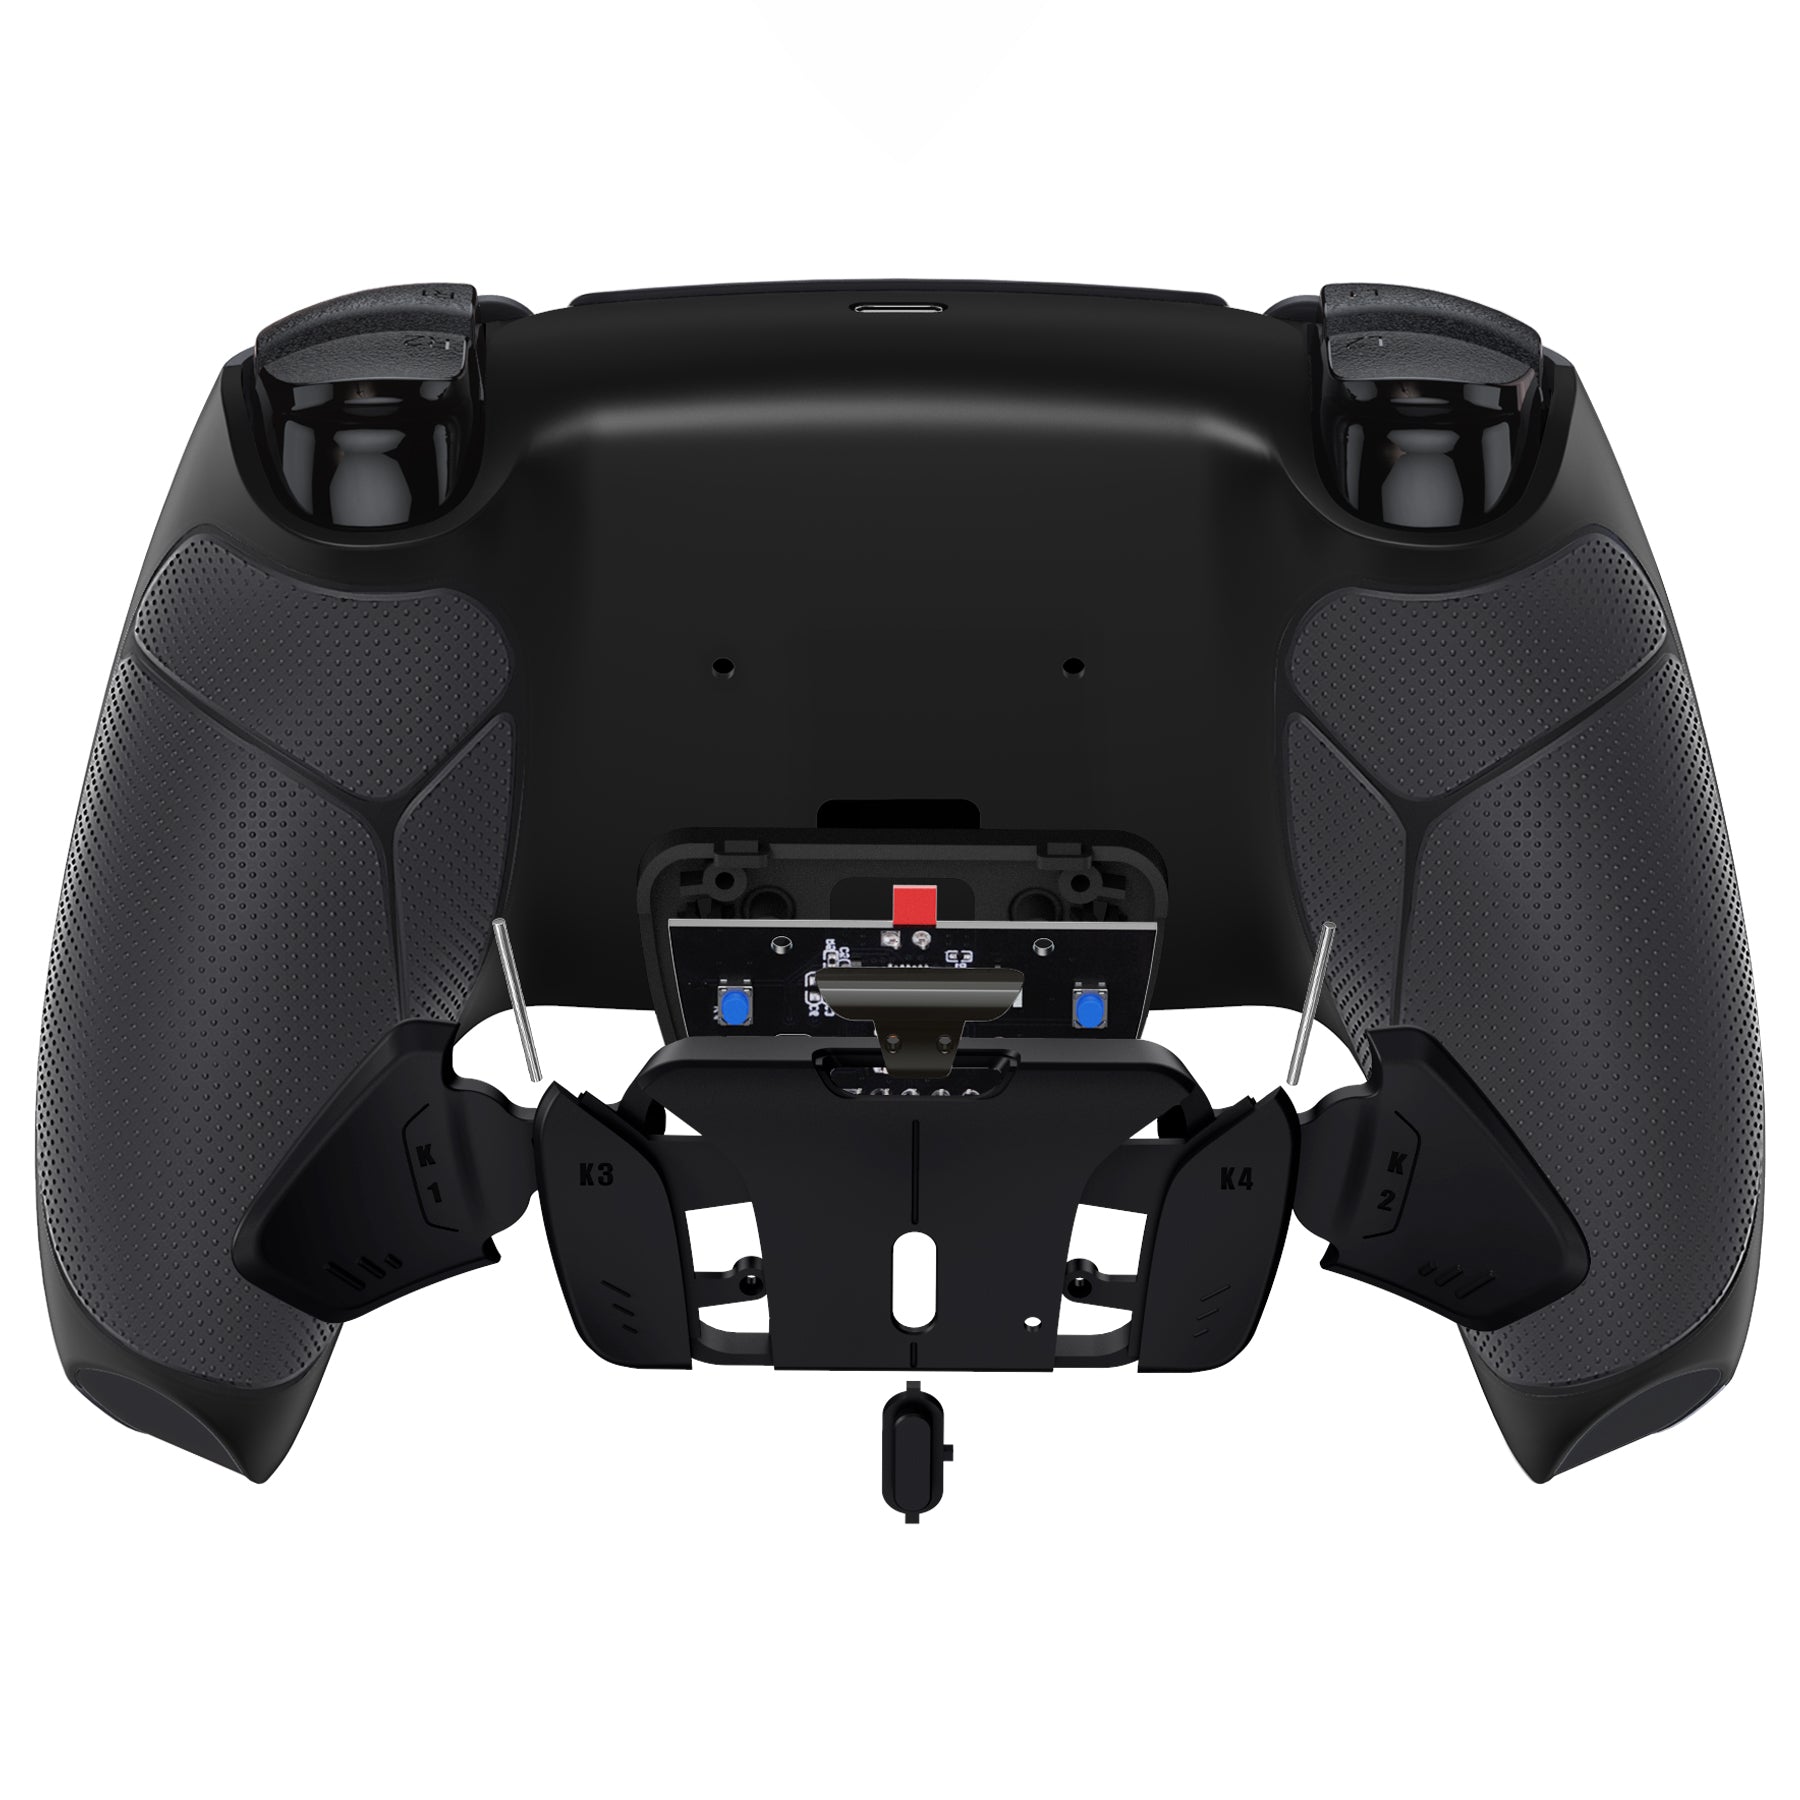 eXtremeRate Retail Black Rubberized Grip Remappable RISE4 Remap Kit for PS5 Controller BDM-030, Upgrade Board & Redesigned Black Back Shell & 4 Back Buttons for PS5 Controller - Controller NOT Included - YPFU6001G3